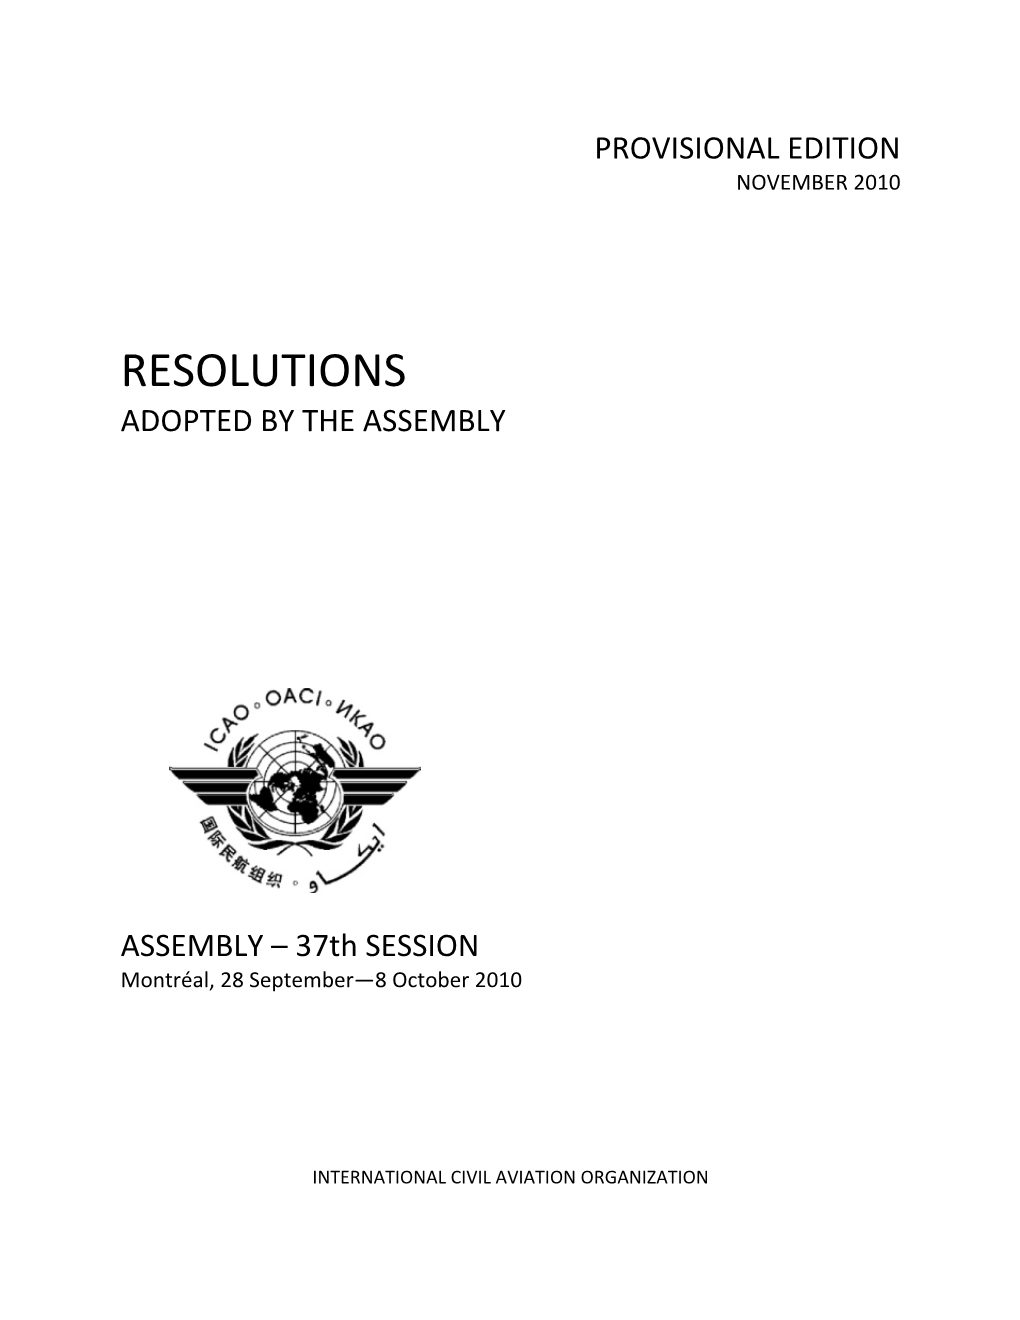 The Assembly Resolution